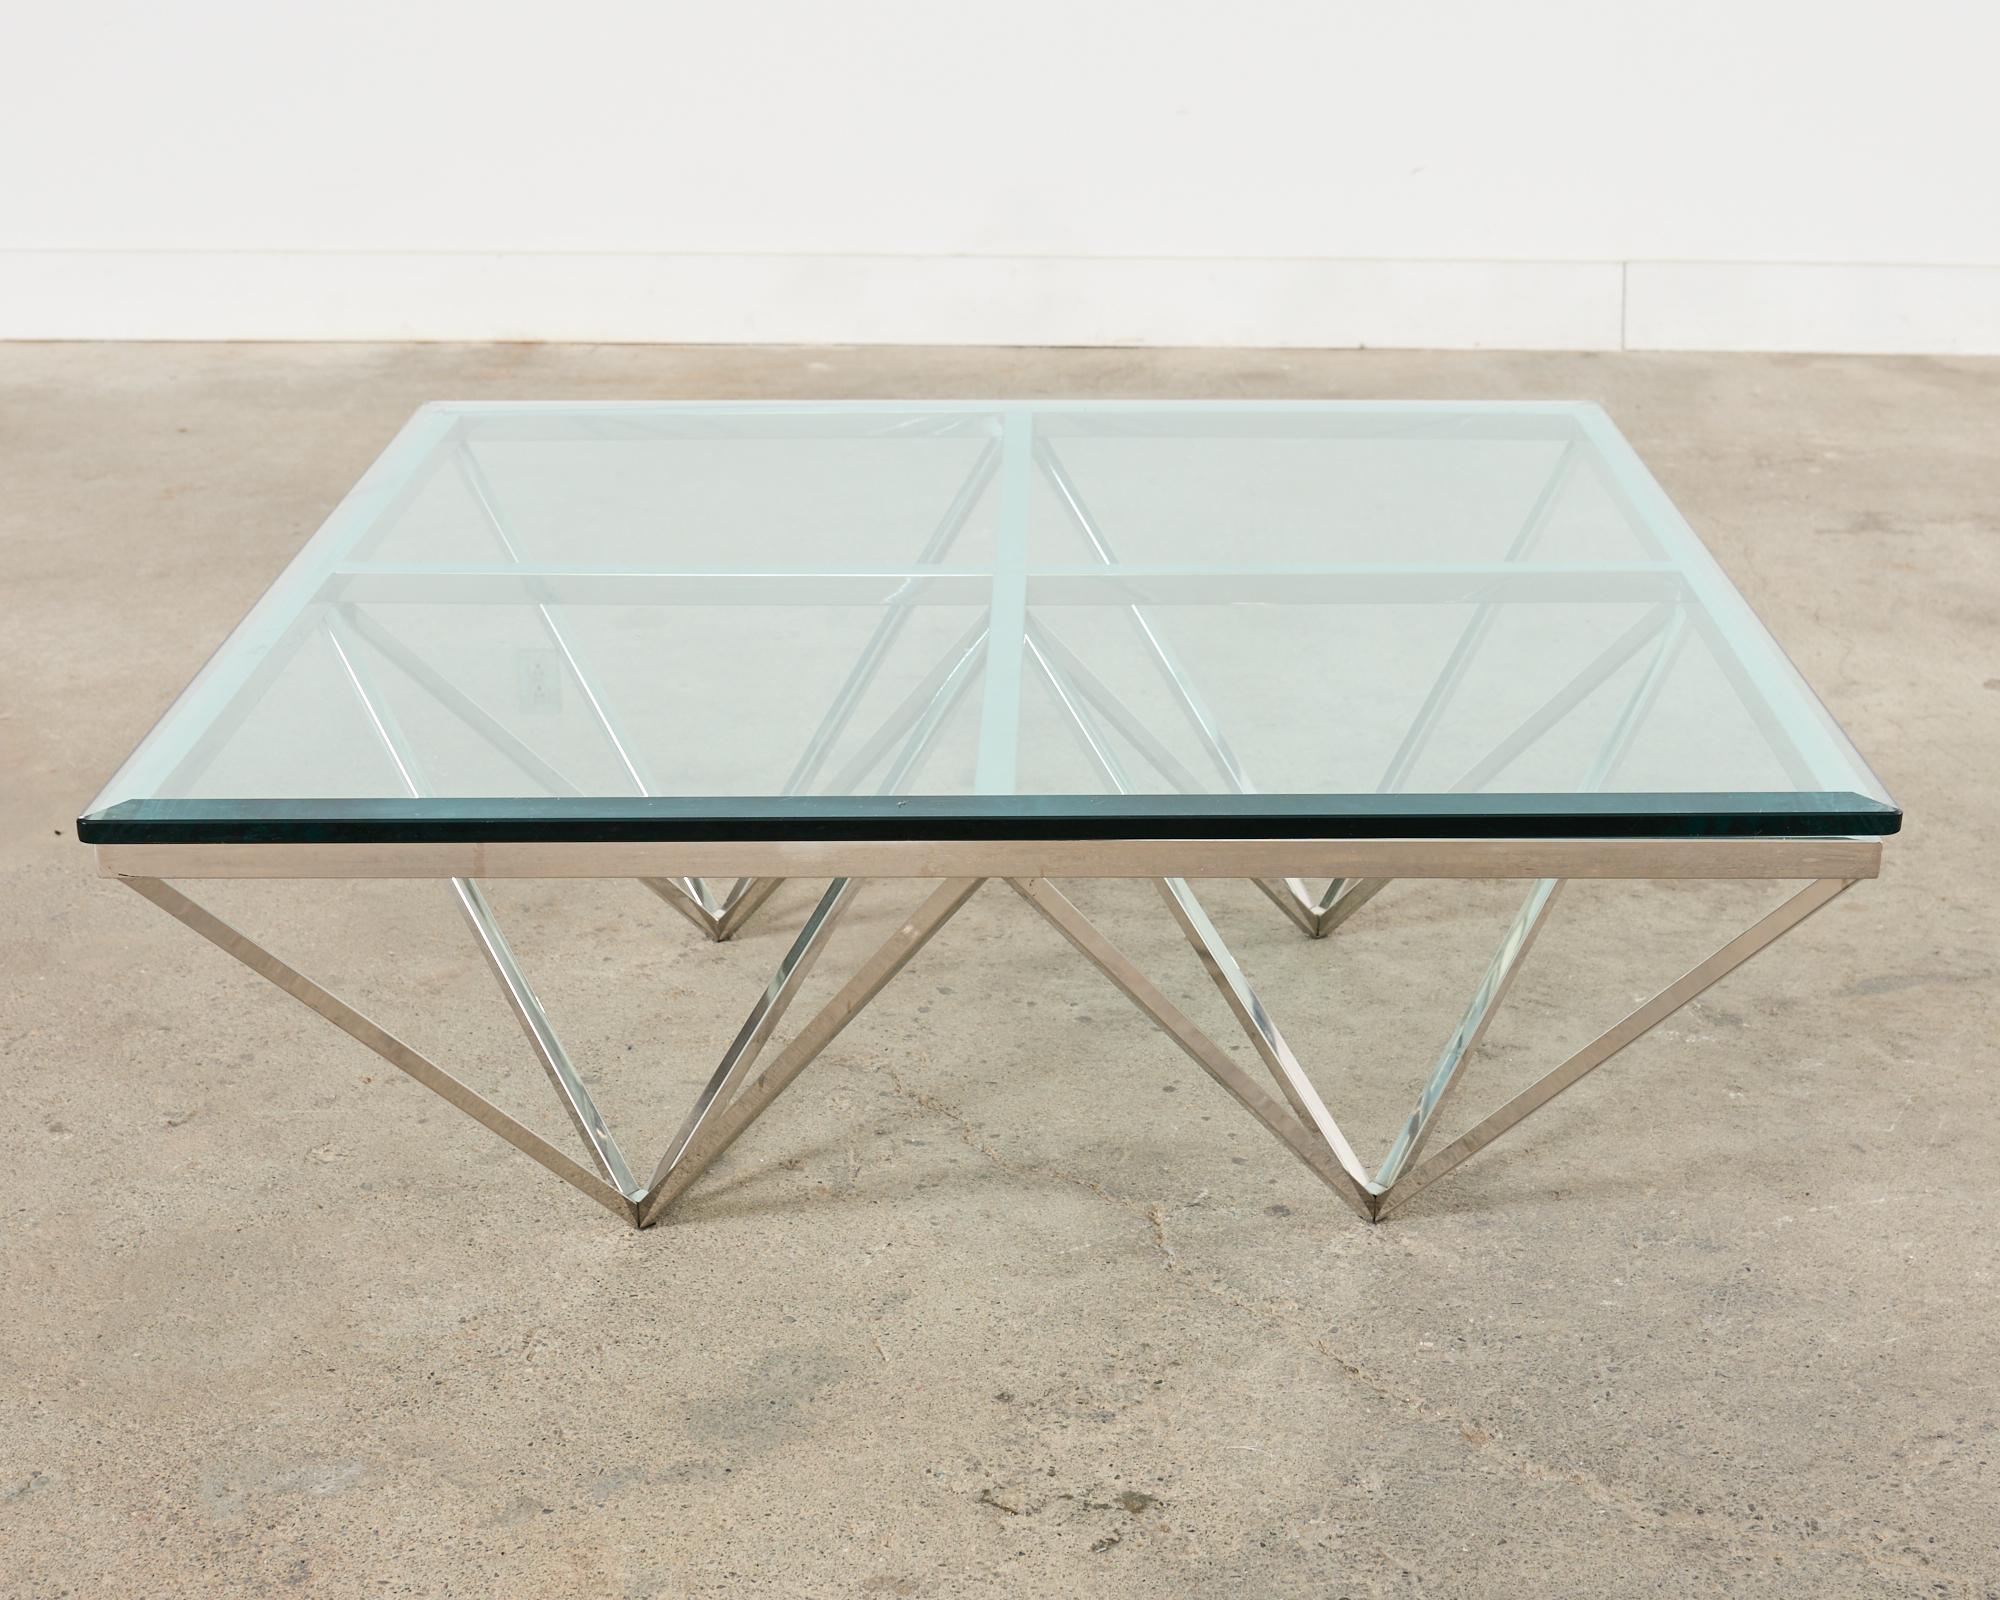 Paolo Piva Style Alanda Square Pyramidal Cocktail Table For Sale 2